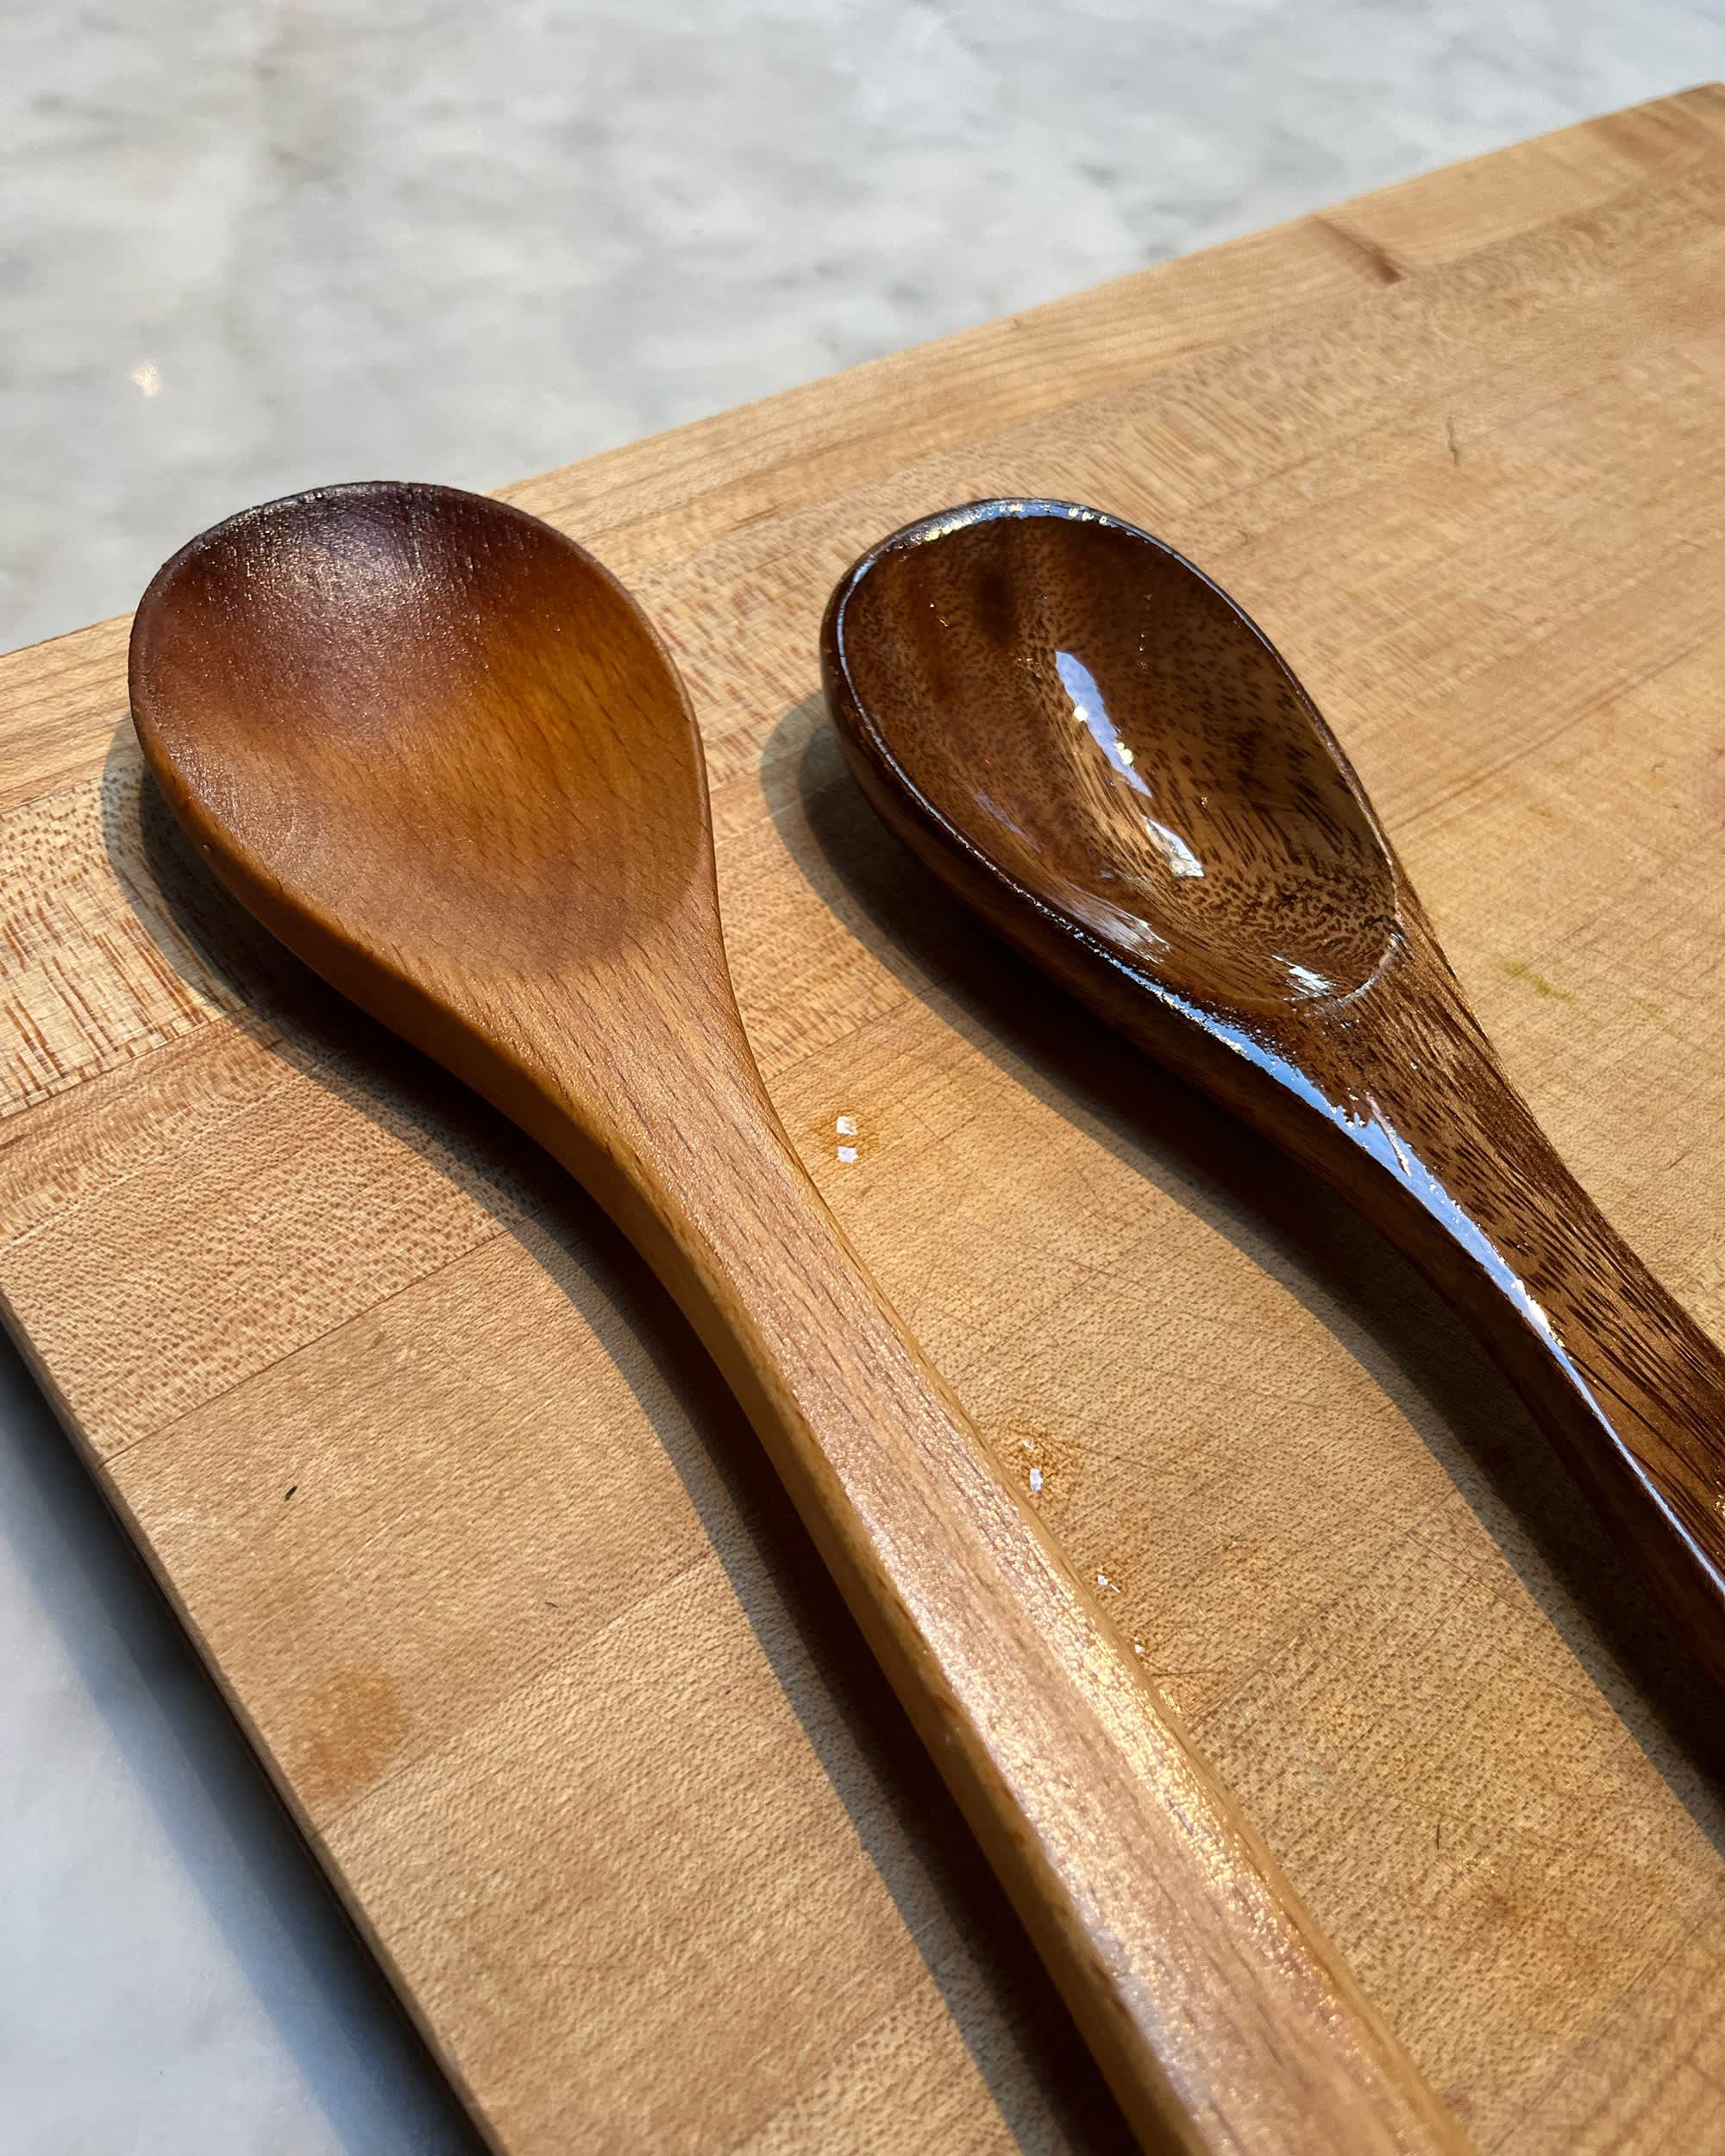 https://cdn.apartmenttherapy.info/image/upload/v1698761008/k/Edit/2023-10-atks-method-for-cleaning-wooden-spoons/atks-method-for-cleaning-wooden-spoons-3219.jpg